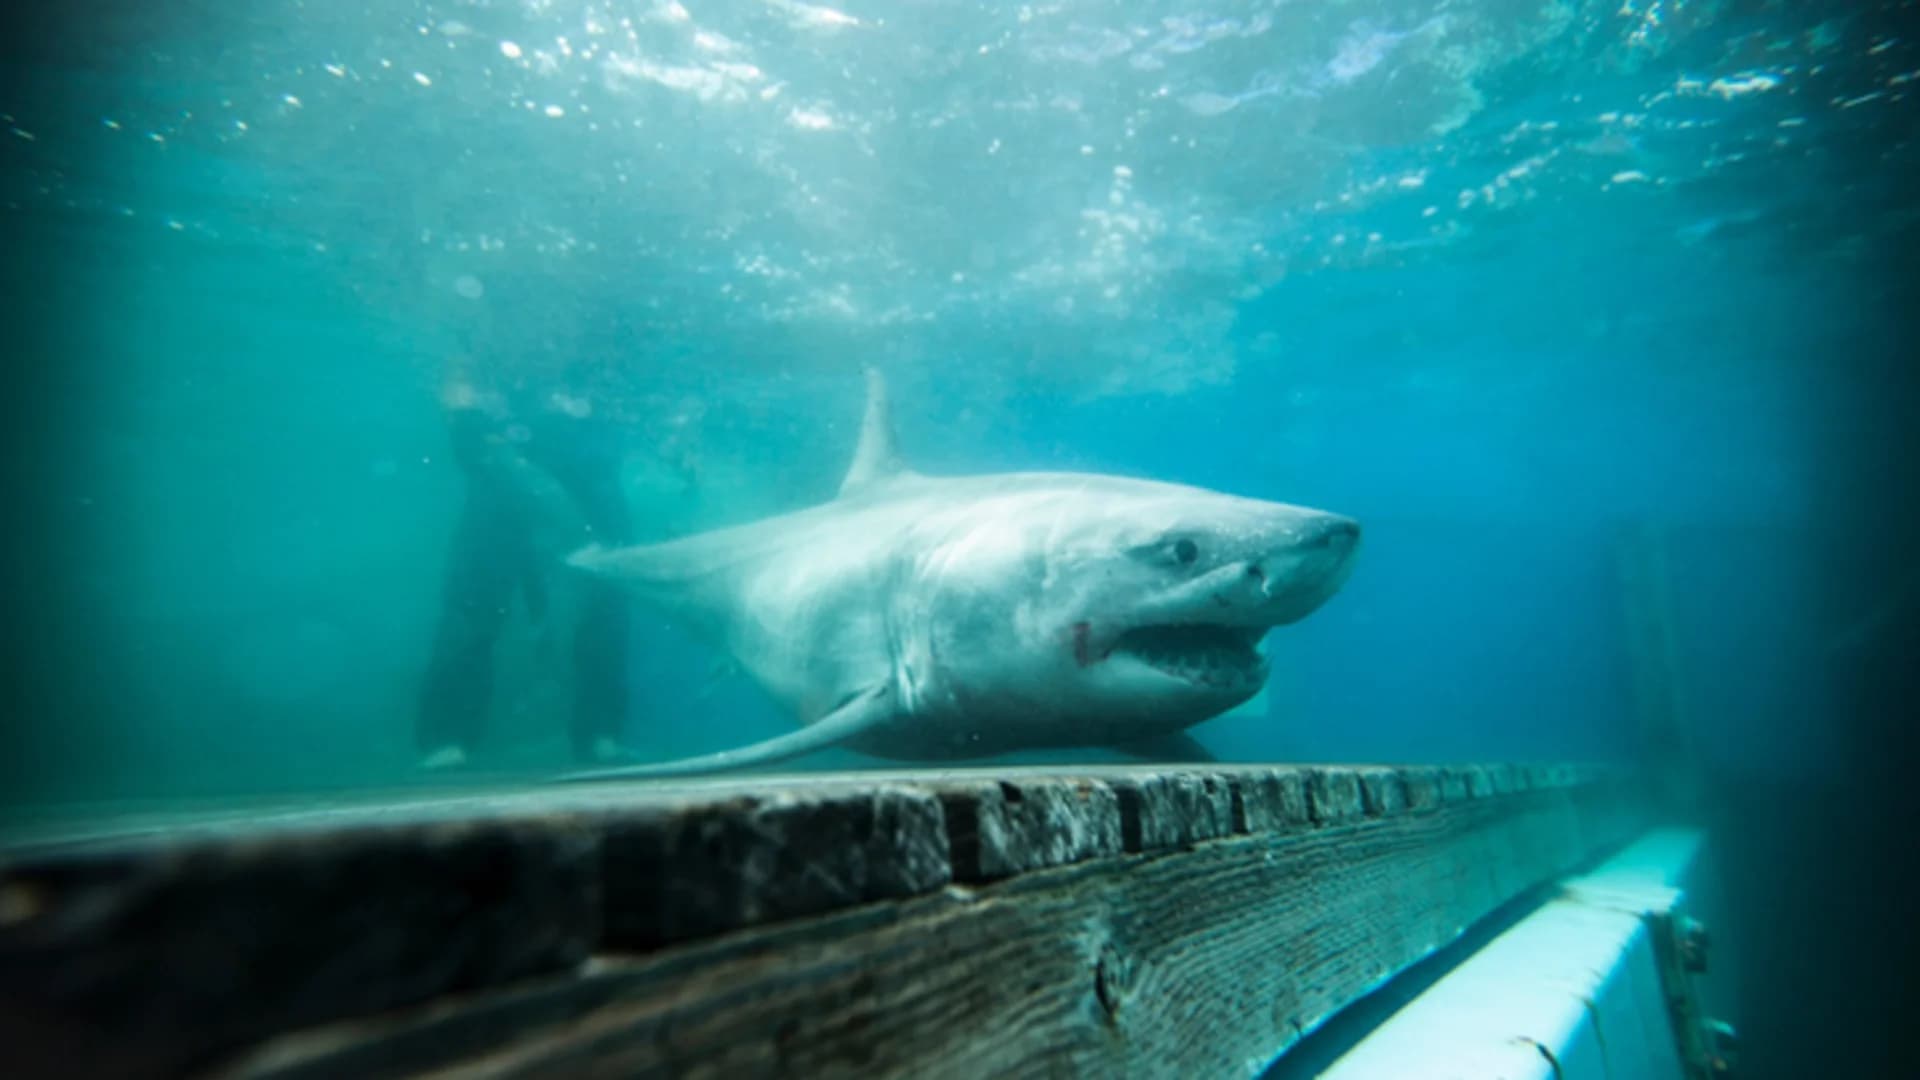 Researchers tracking great white shark in Long Island Sound